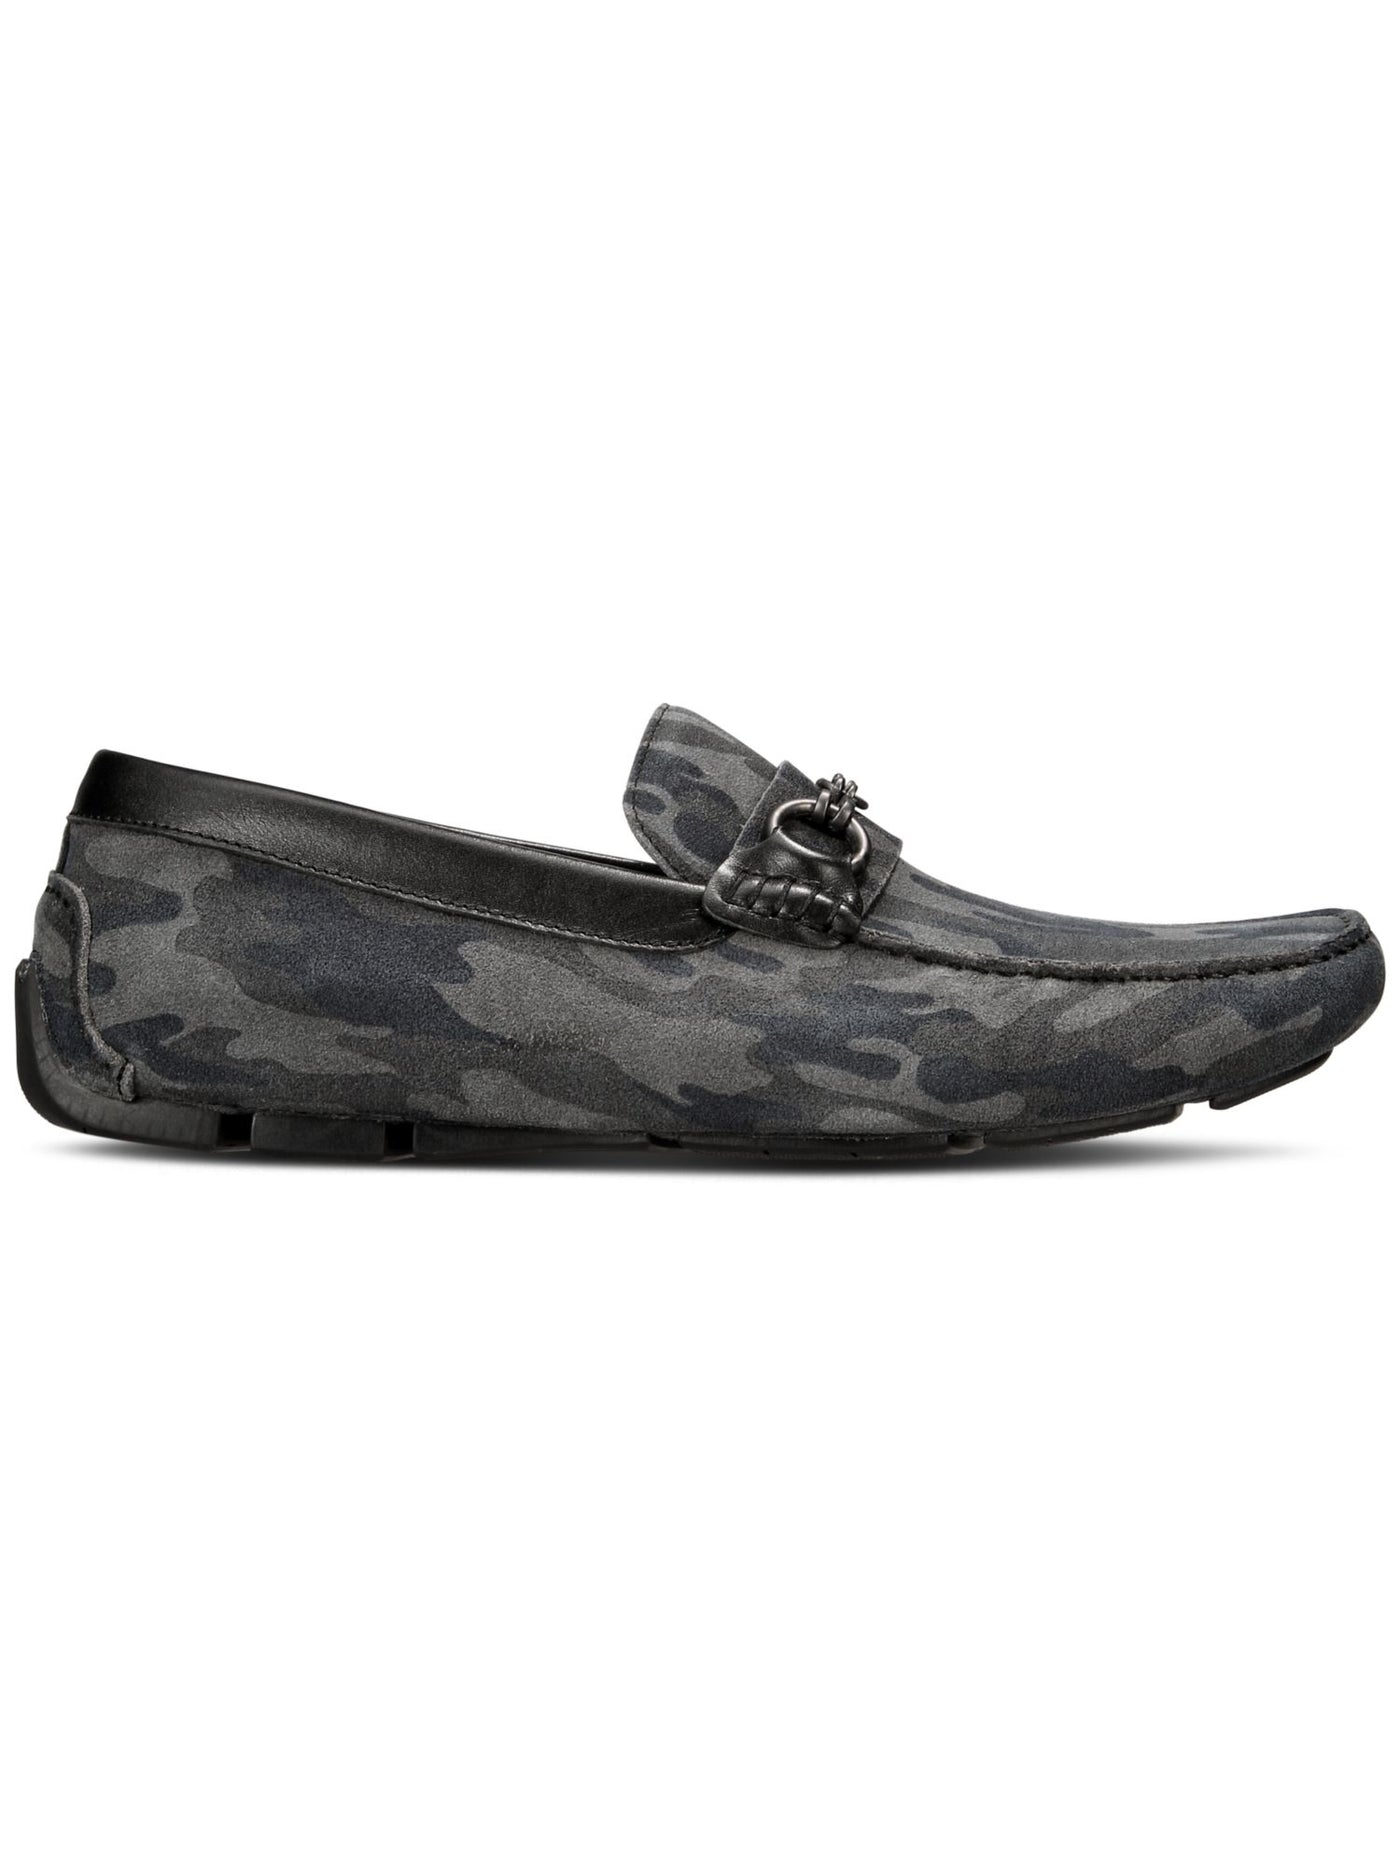 KENNETH COLE NEW YORK Mens Black Camo Gray Camouflage Bit Detail Hardware Topstitch Cushioned Removable Insole Theme Square Toe Slip On Leather Loafers Shoes 10.5